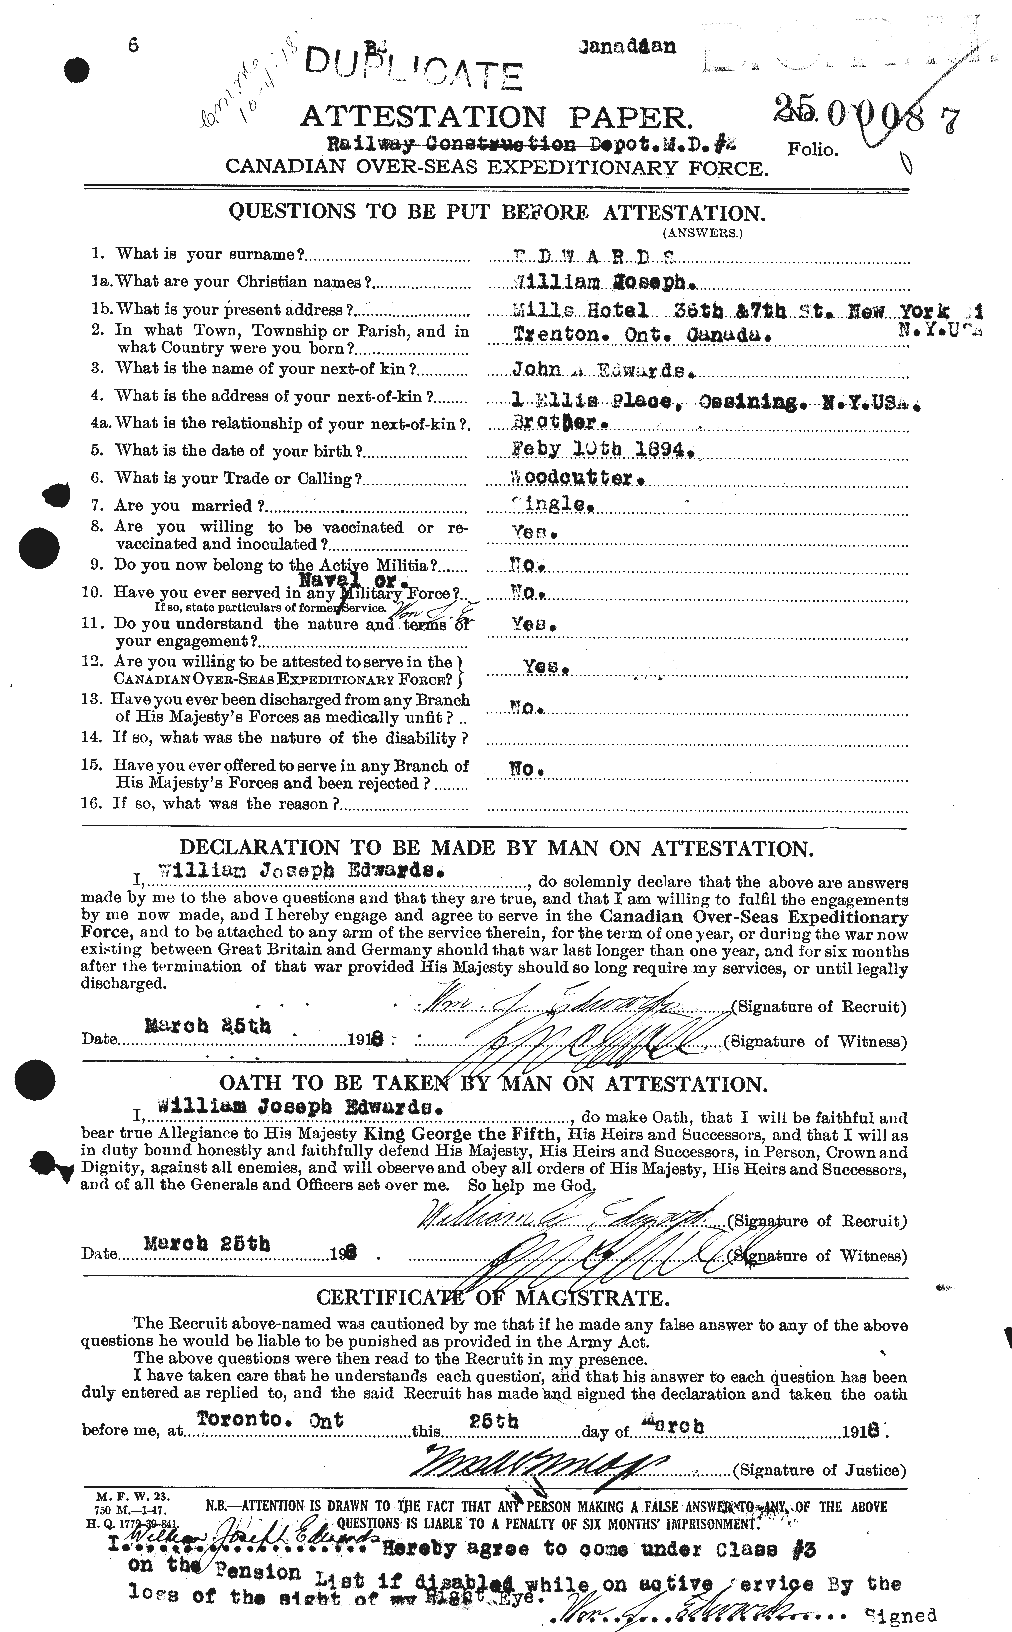 Personnel Records of the First World War - CEF 311928a